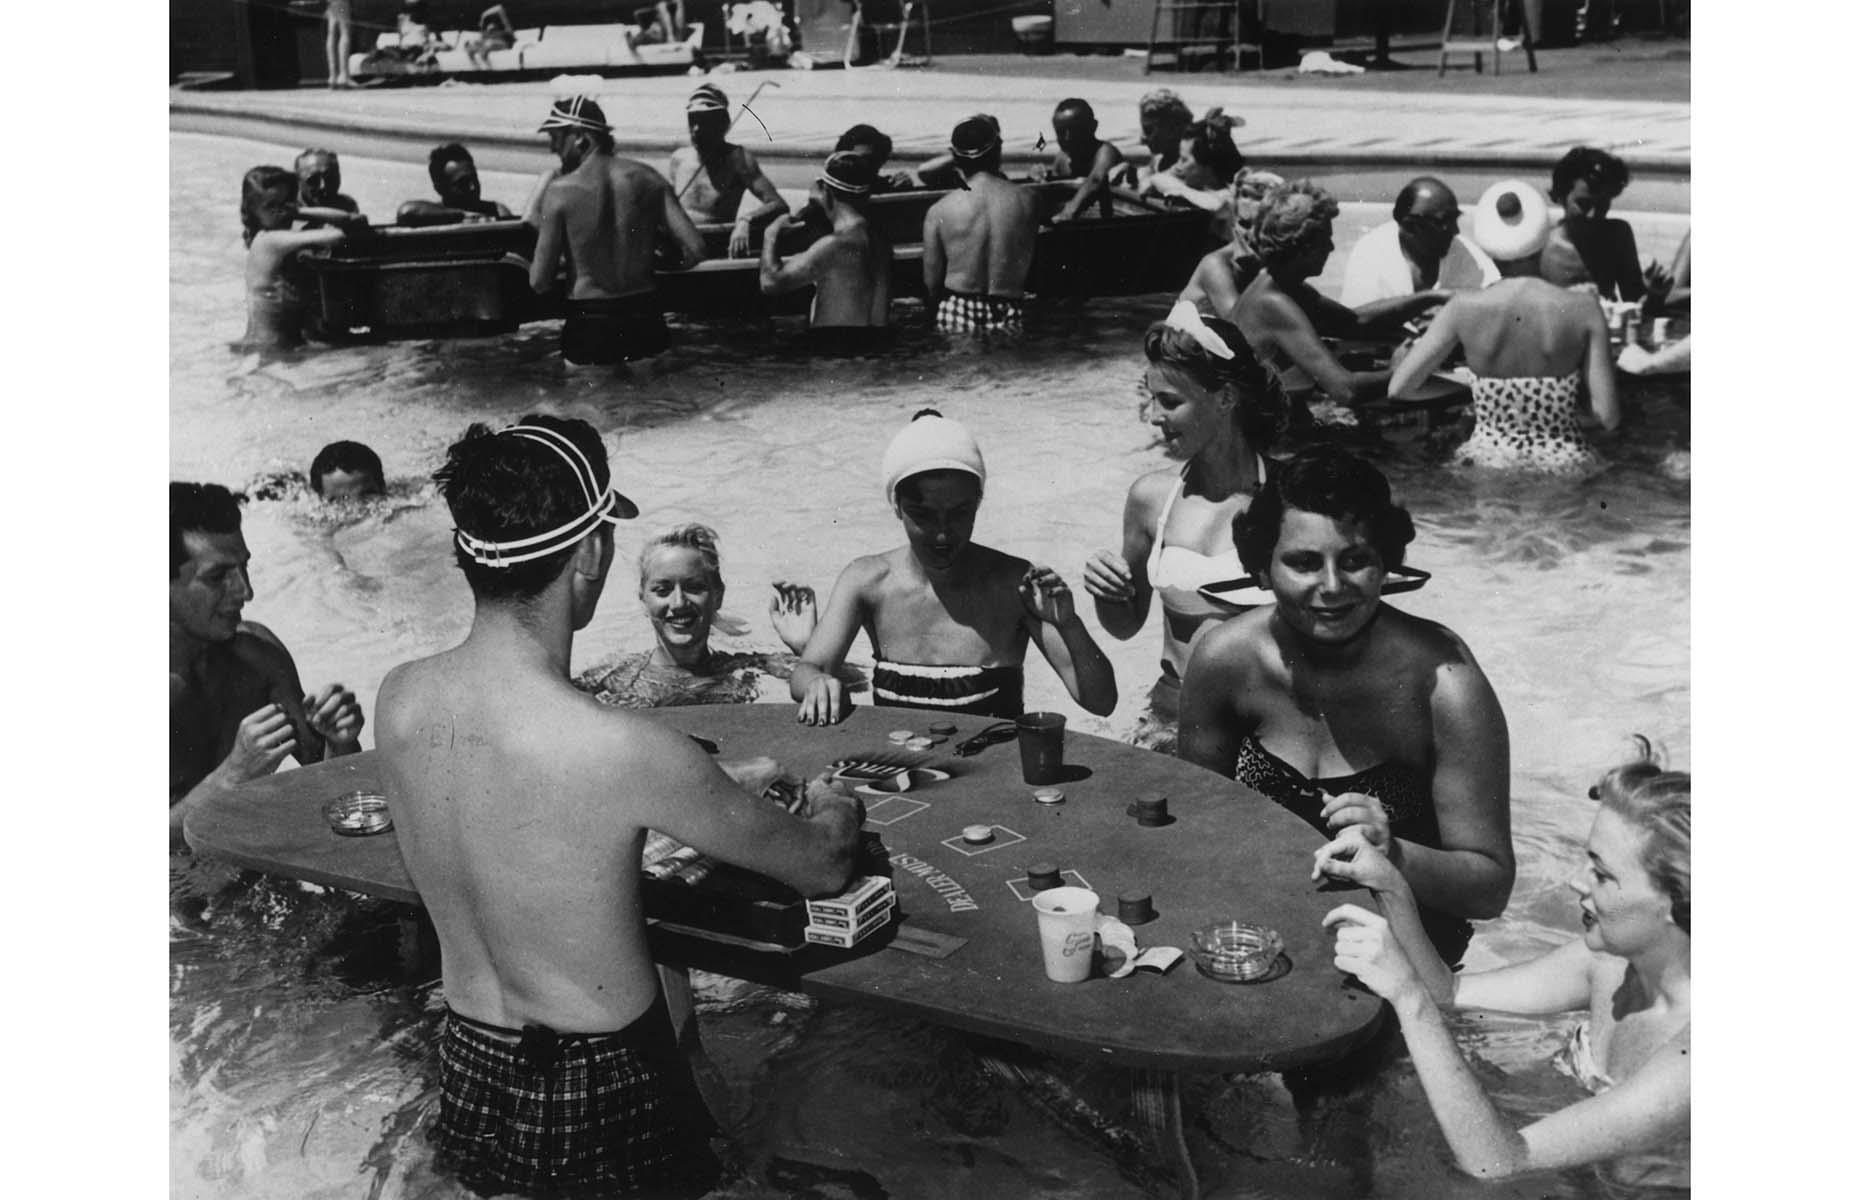 <p>During the following decades, Las Vegas truly enjoyed its golden era. From legendary performers taking to stage every night to new hotels that gave the city its modern face, this was the place to let loose and enjoy life. Pictured is a croupier dealing a hand in a blackjack game at the famous swimming pool casino at the Sands Hotel in 1965.</p>  <p><a href="https://www.loveexploring.com/gallerylist/99342/sin-city-secrets-the-incredible-story-of-las-vegas"><strong>Read more about the incredible history of Las Vegas here</strong></a></p>